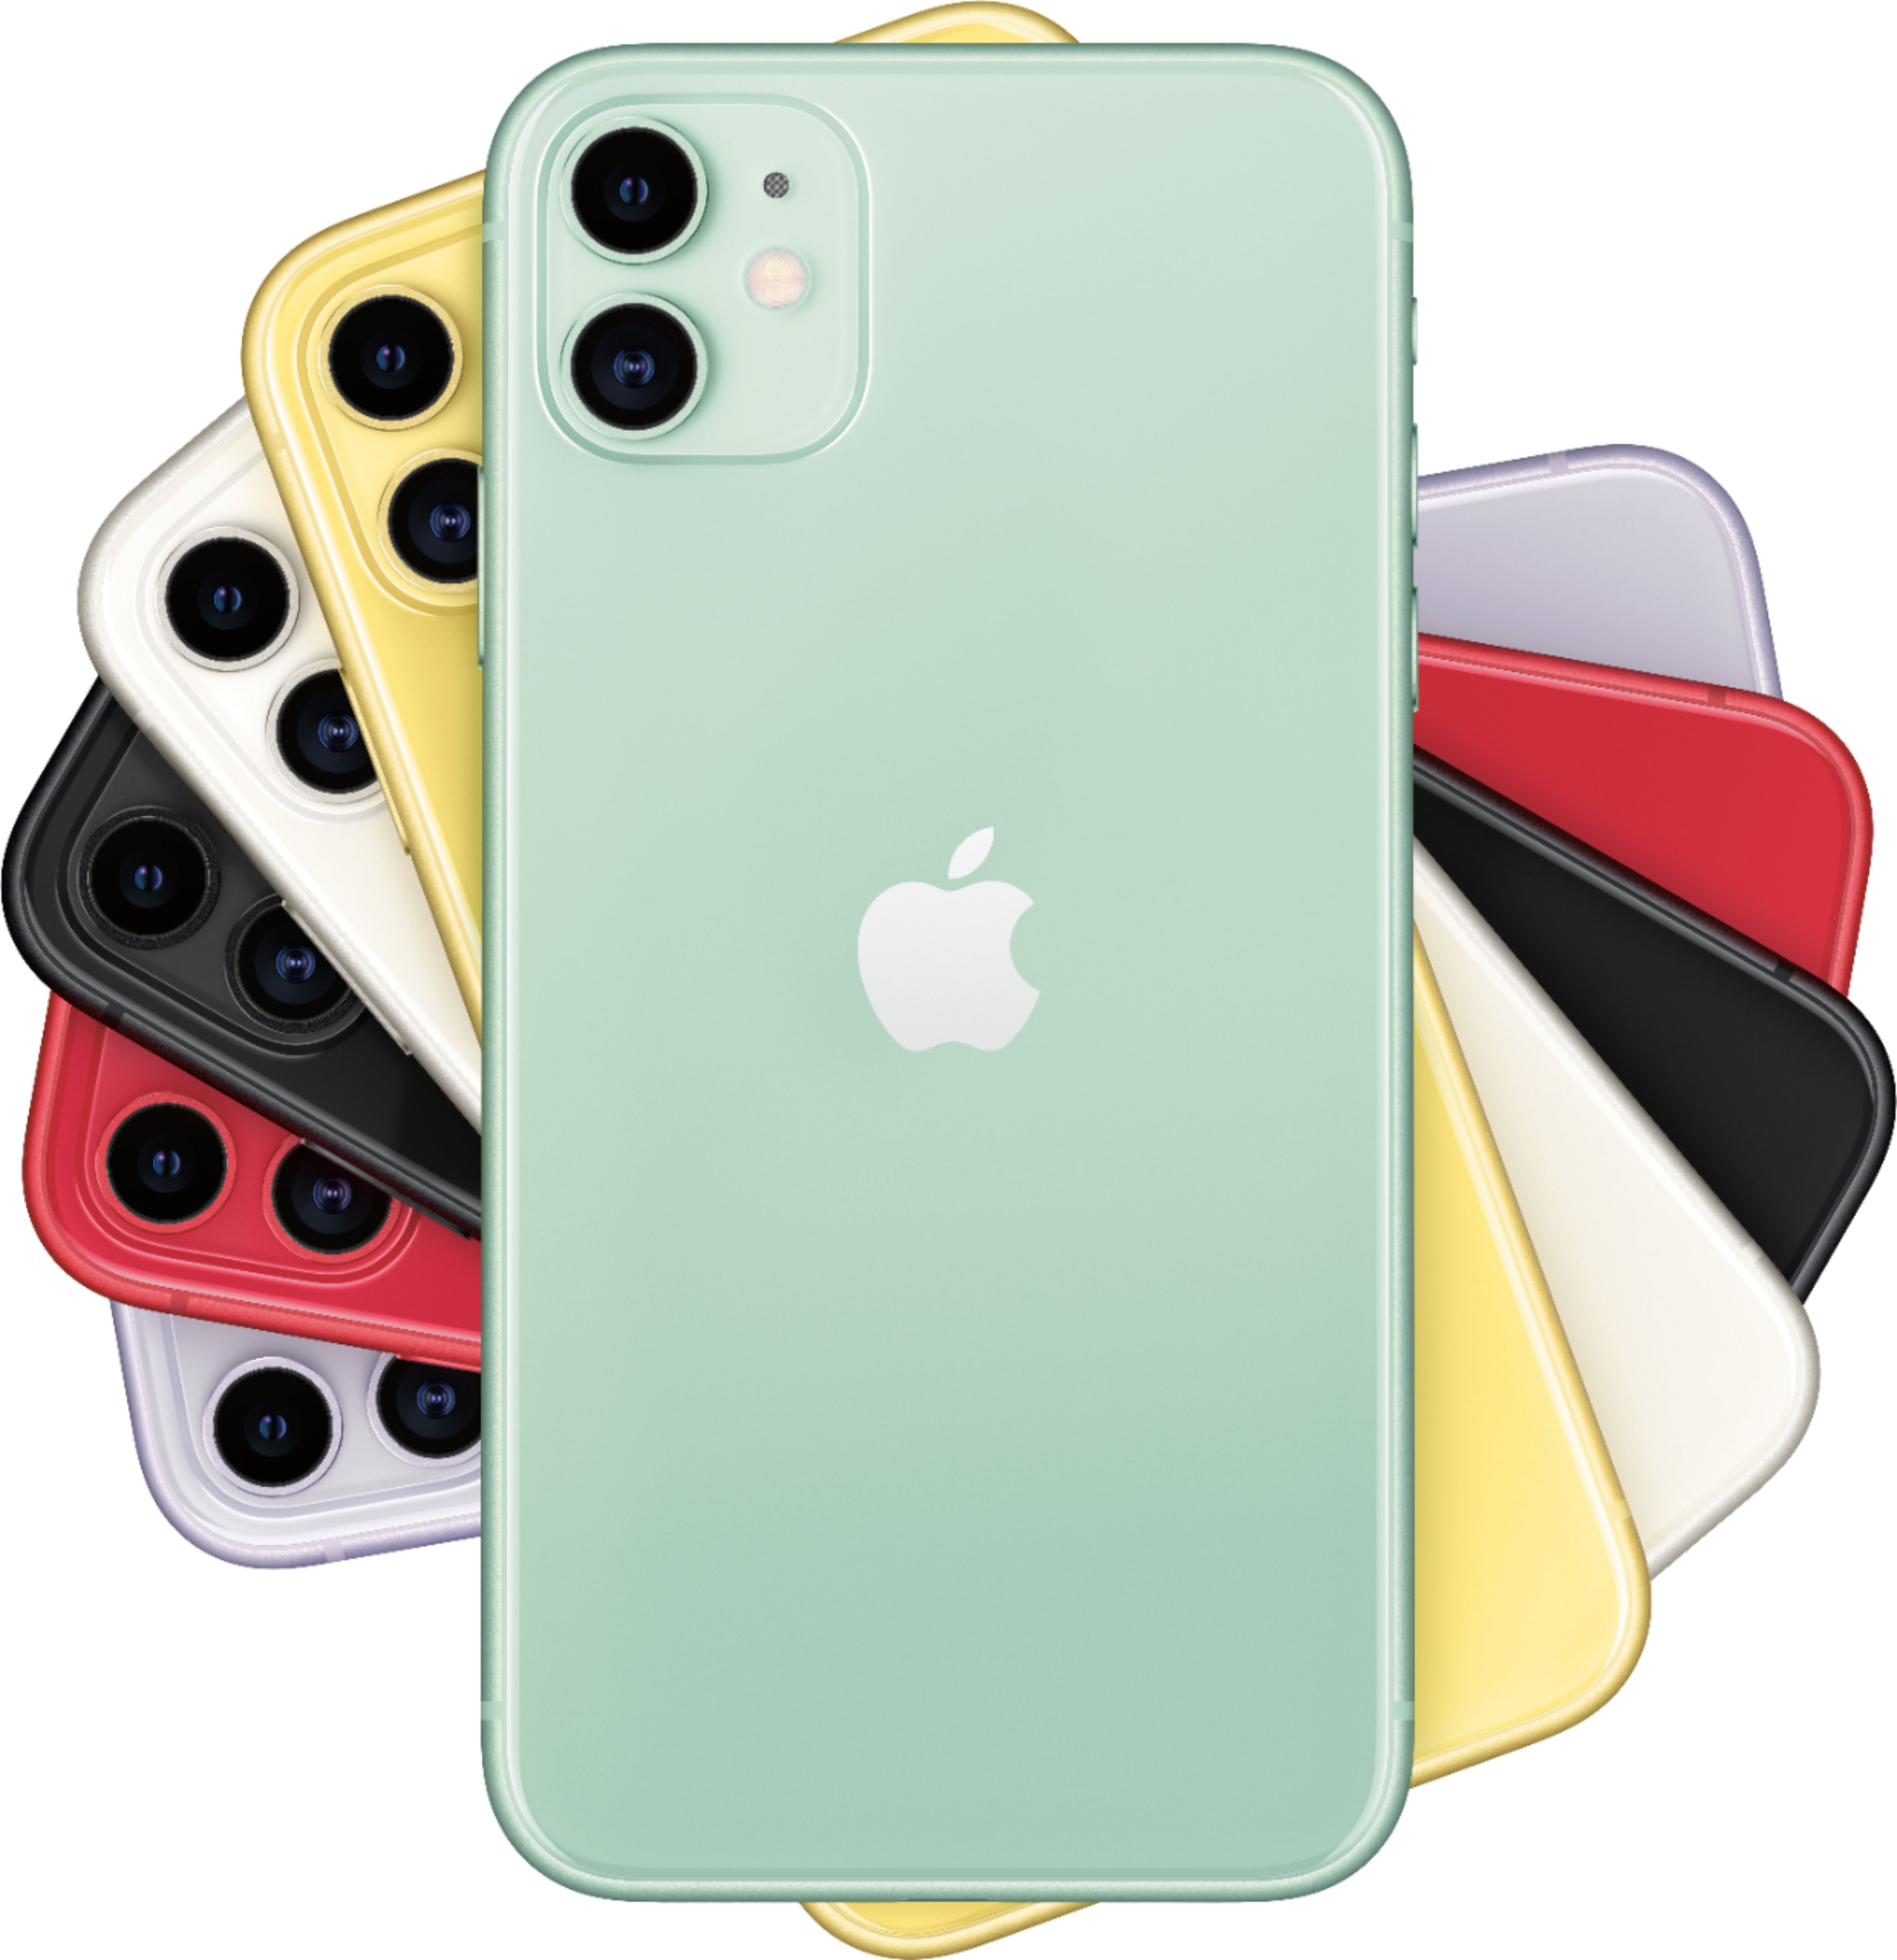 Best Buy: Apple iPhone 11 64GB Green (AT&T) MWLD2LL/A